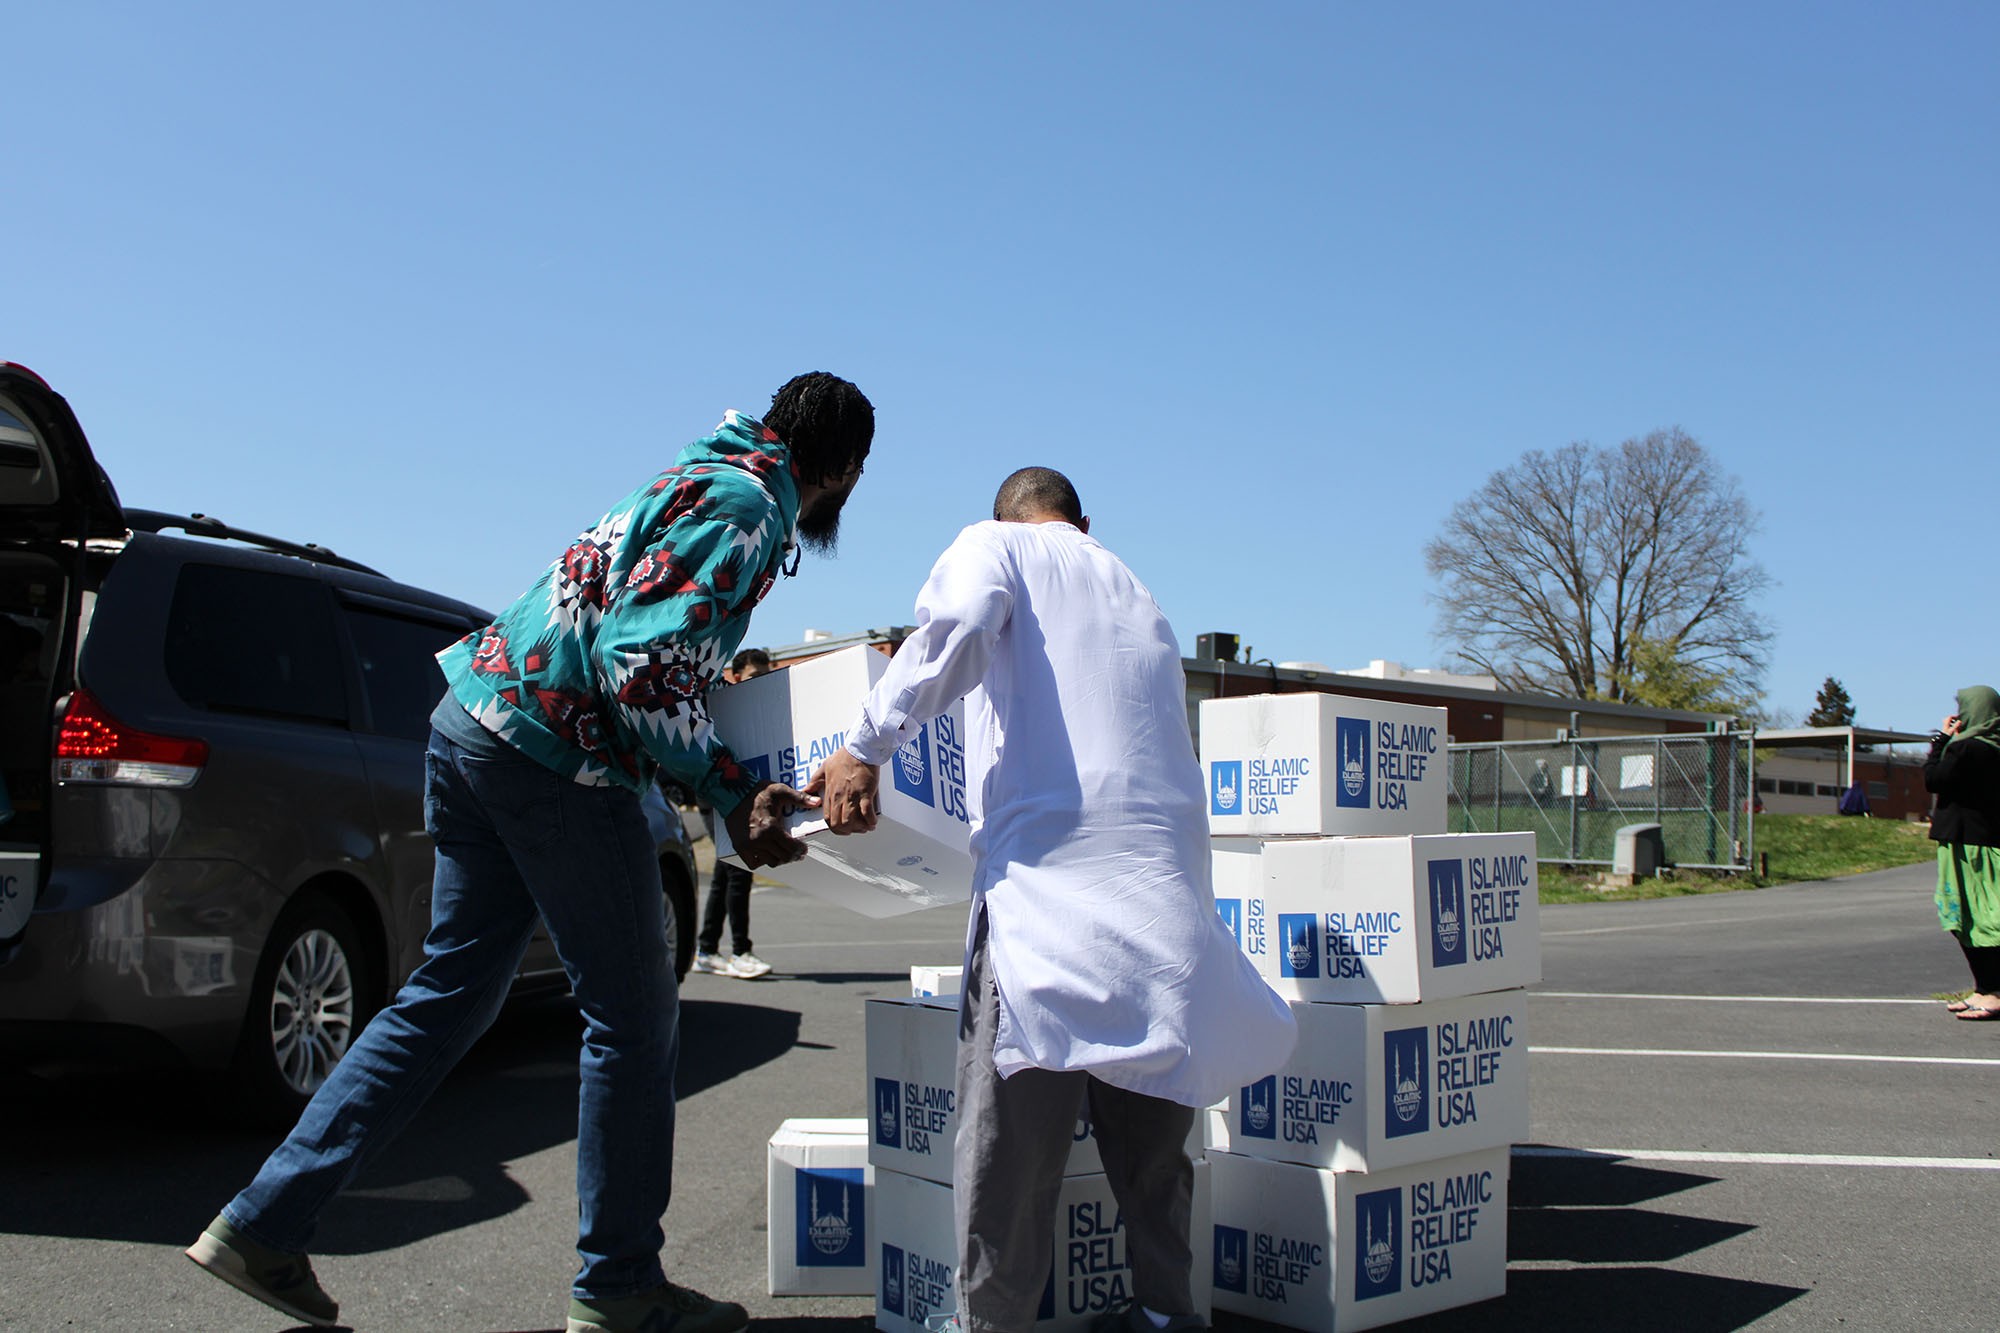 Al-Huda School and Islamic Relief USA host food and clothing drive